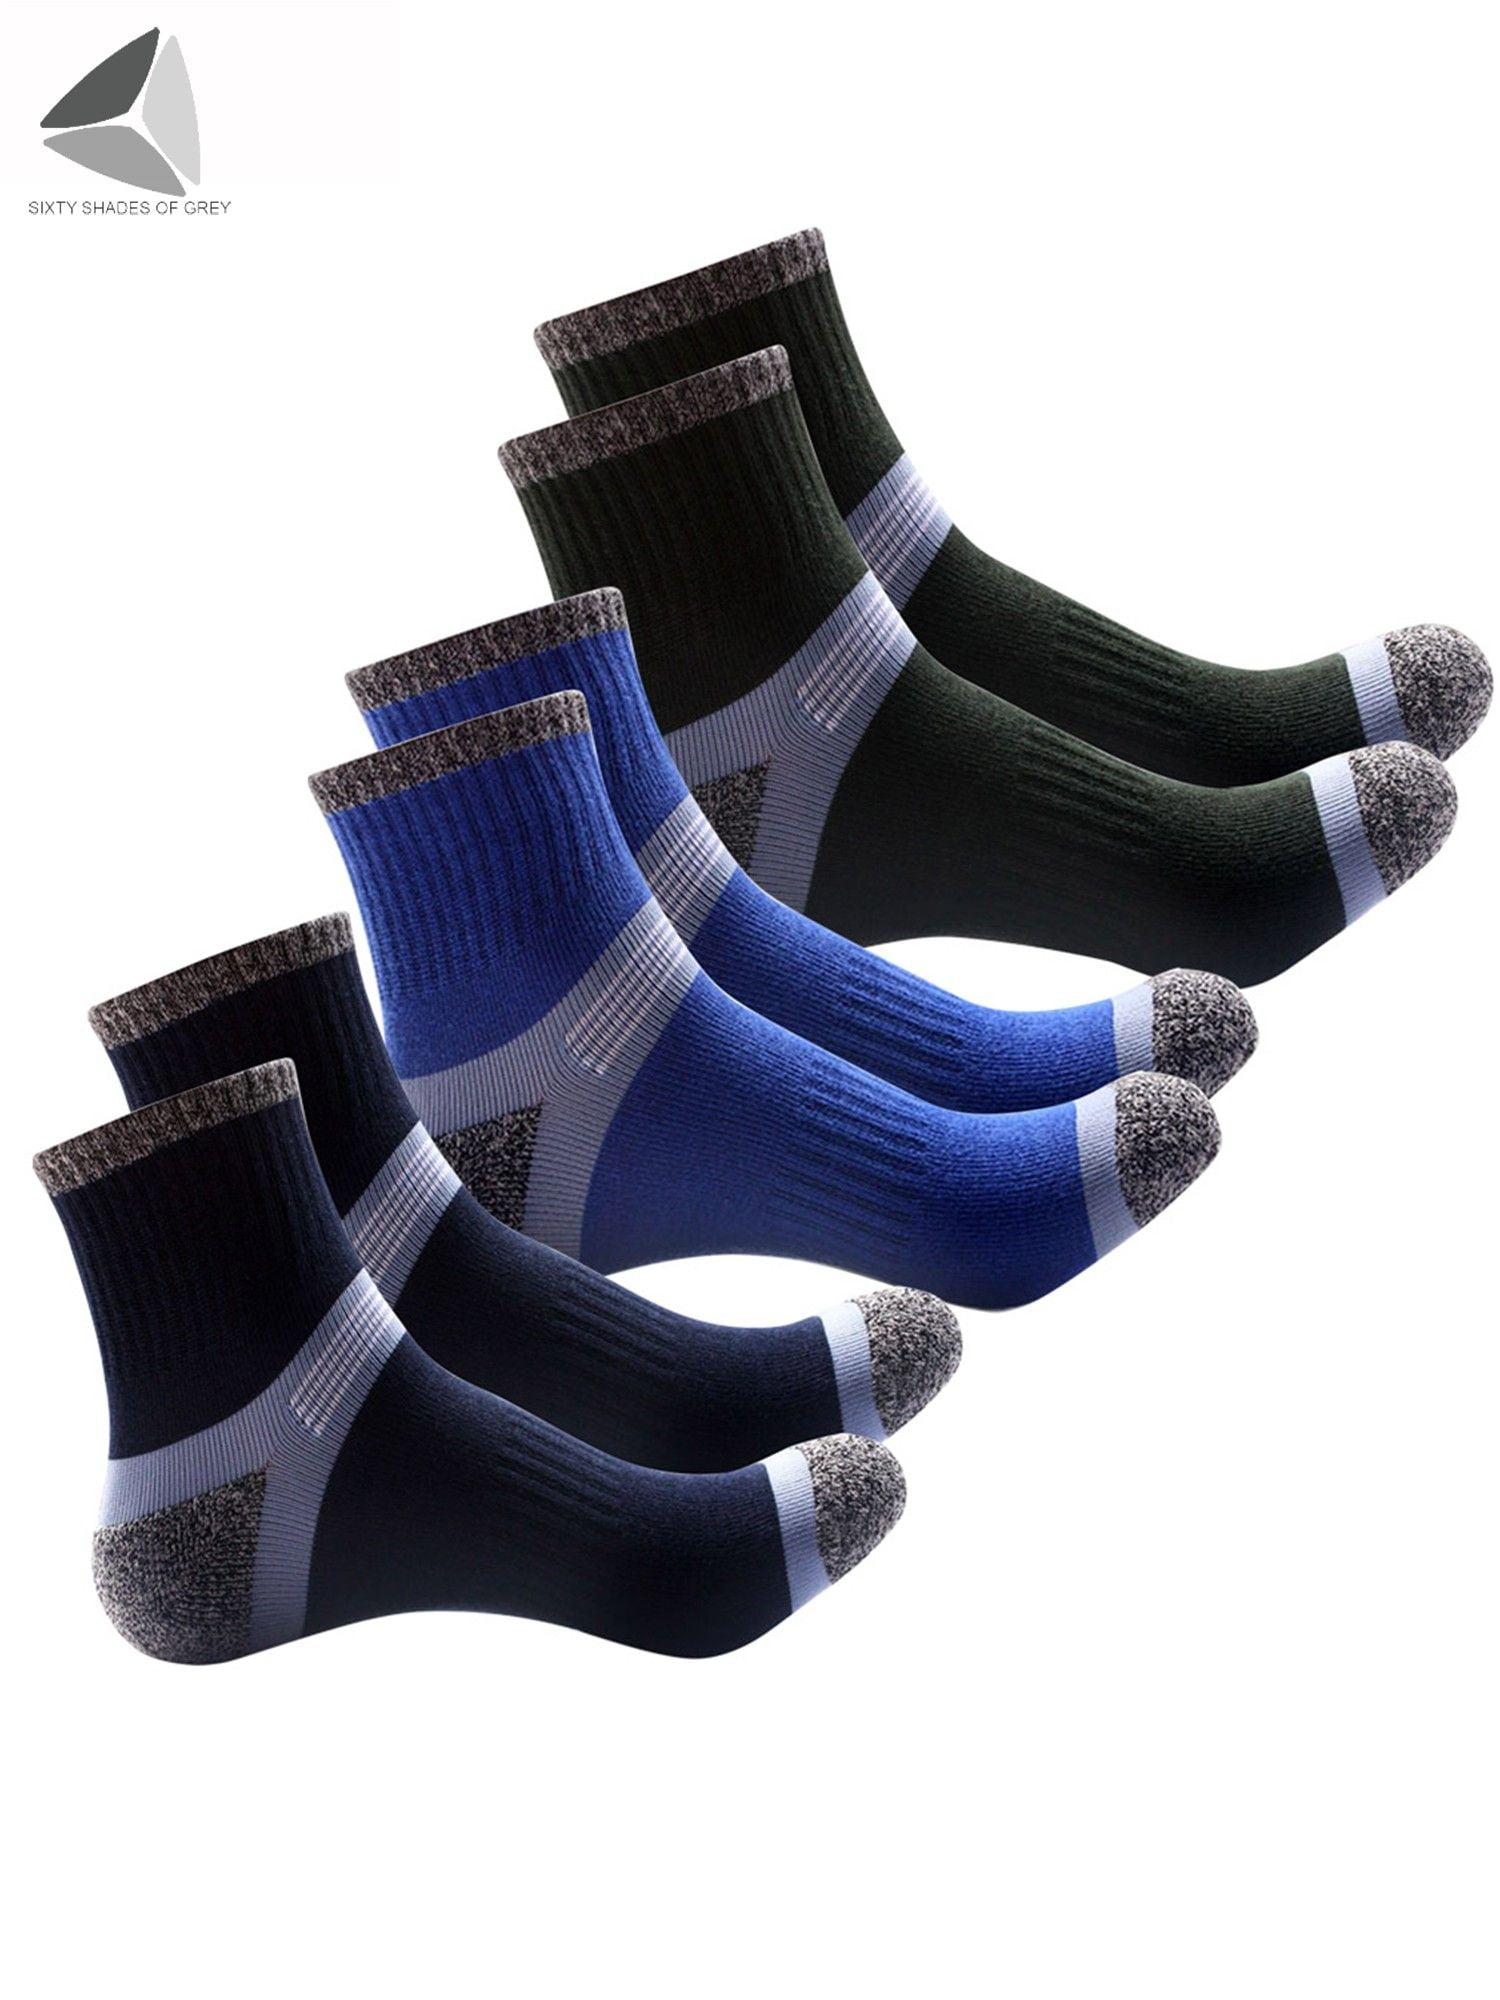 Low Cut Comfort Casual Socks SOFTWIND Men’s Cushion Ankle Socks With Arch Support